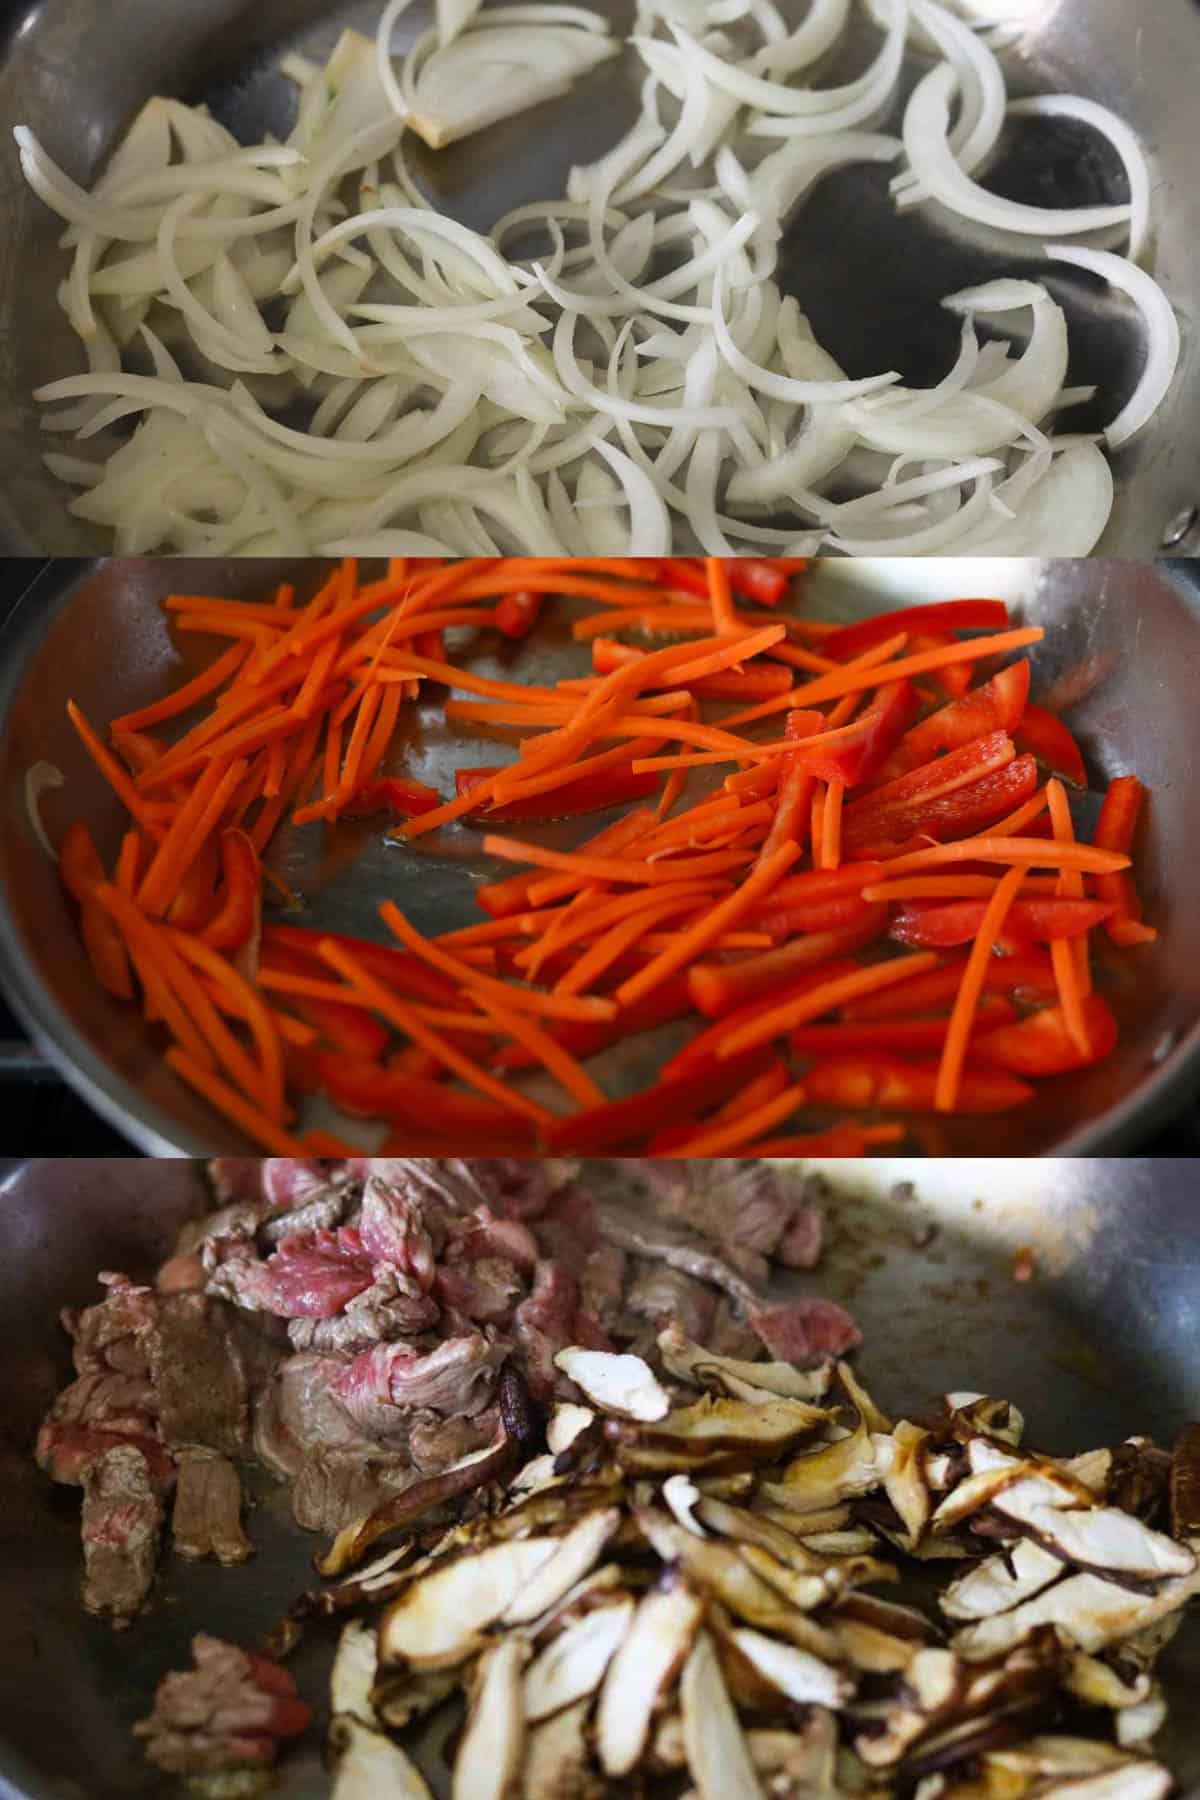 Collage of 3 images. Top image of sliced onions cooking in pan. Middle image of sliced carrots and bell peppers cooking in pan. Bottom image of sliced beef and mushrooms cooking in pan. 